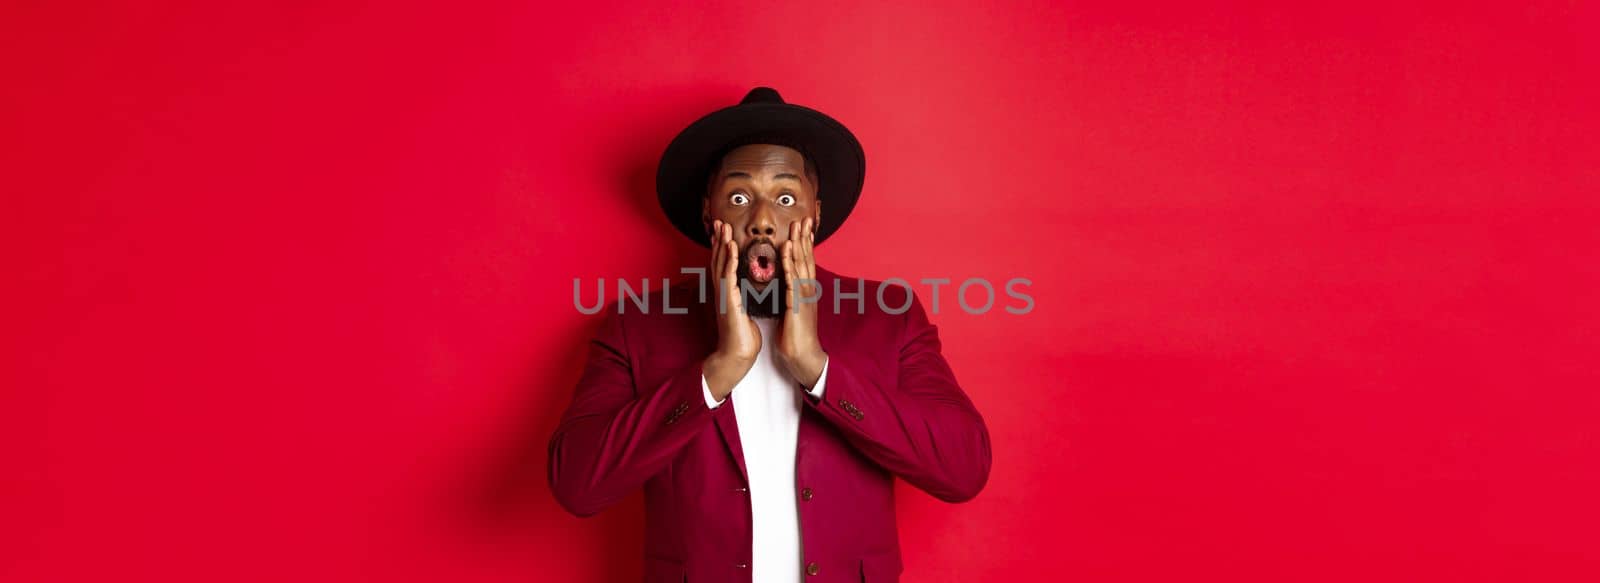 Fashion and party concept. Impressed Black man in classy outfit staring with complete disbelief at camera, gasping and looking surprised, standing over red background.